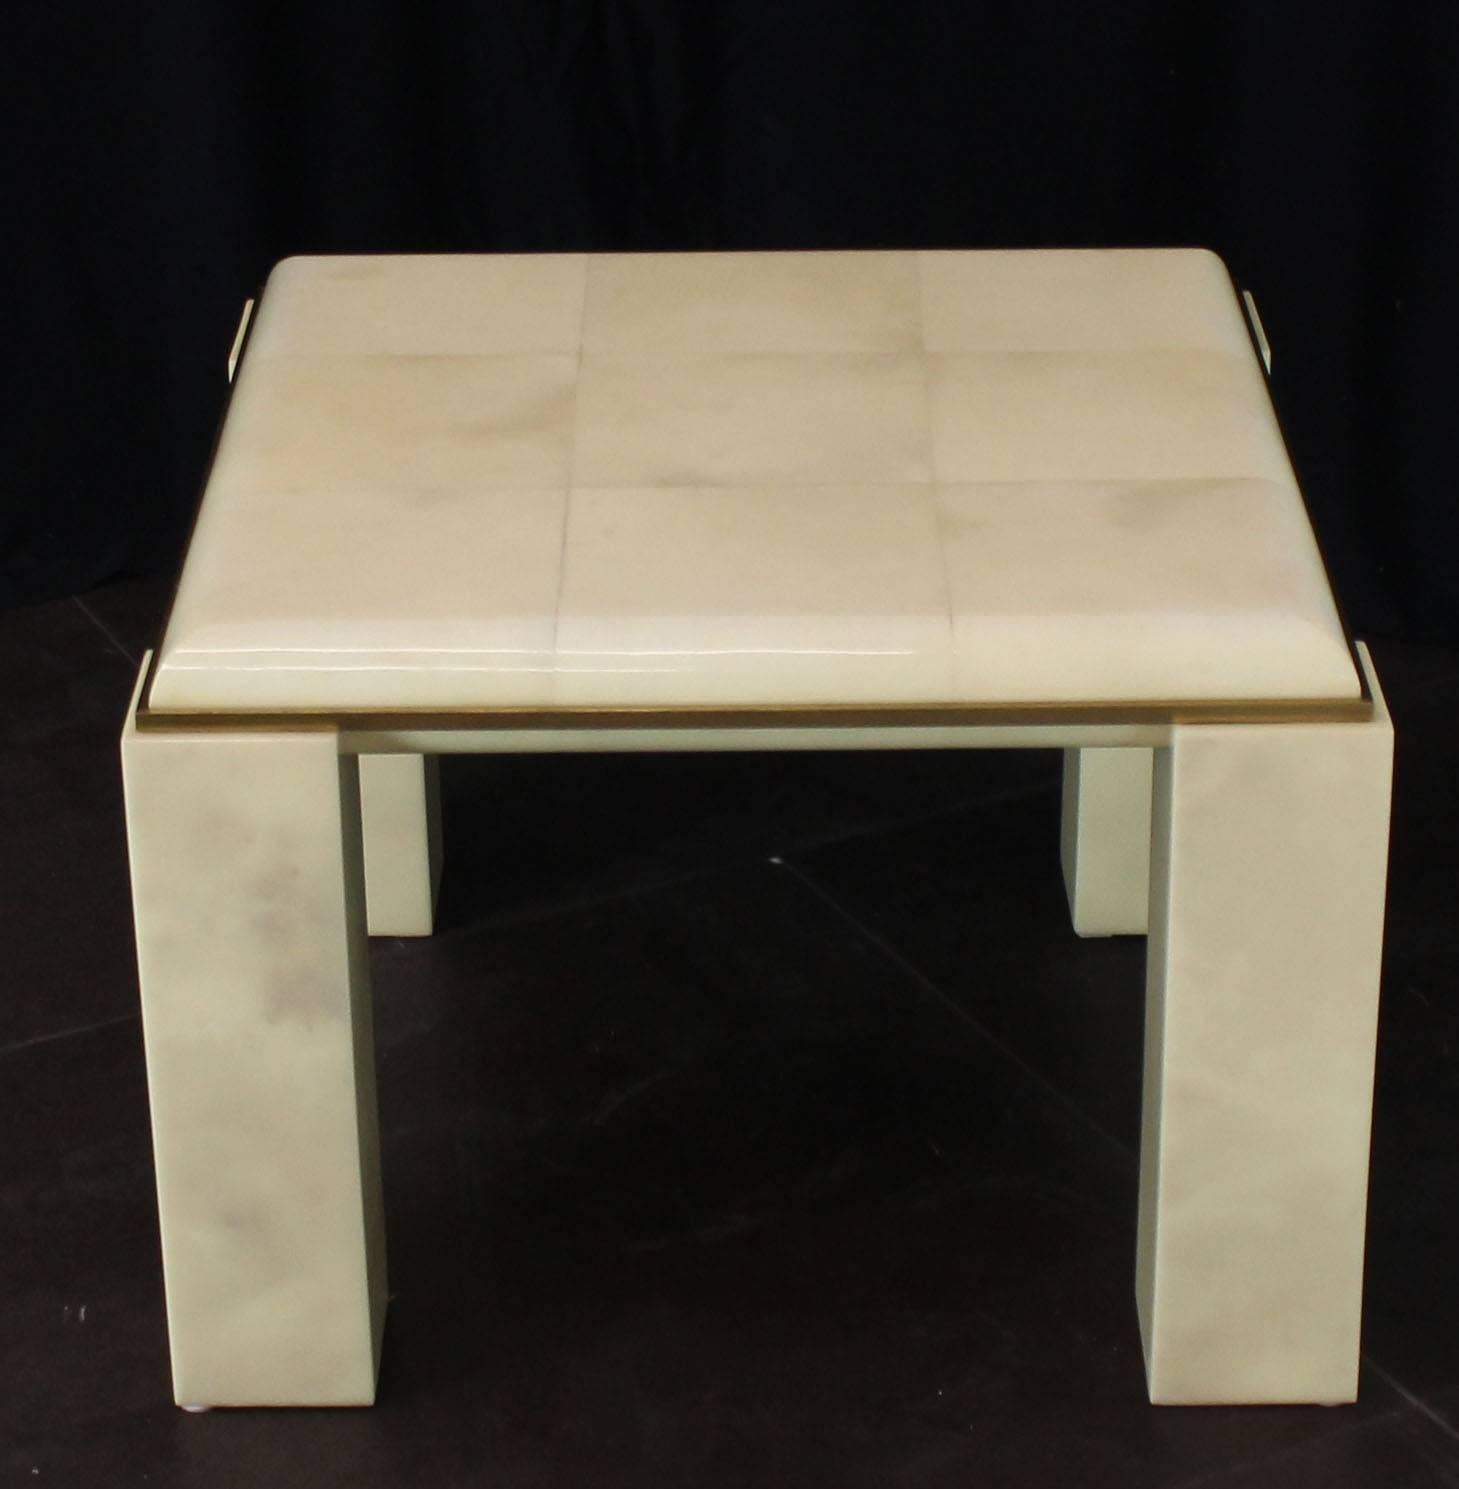 Exception quality square goatskin tiles top table finish with thick high gloss lacquer.